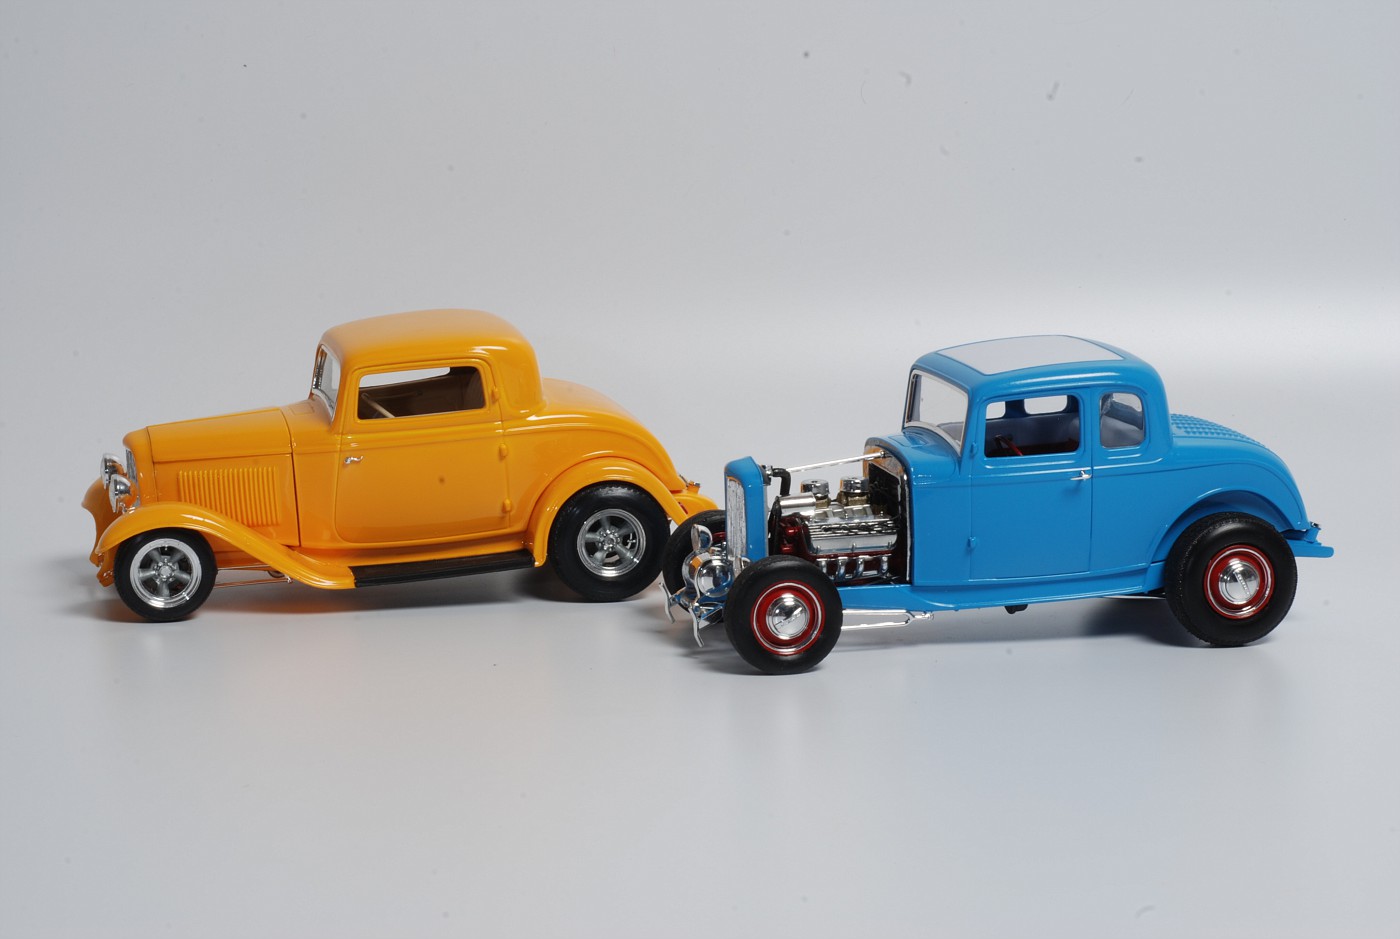 Revell '32 Ford Five Window Coupe Kit Build.